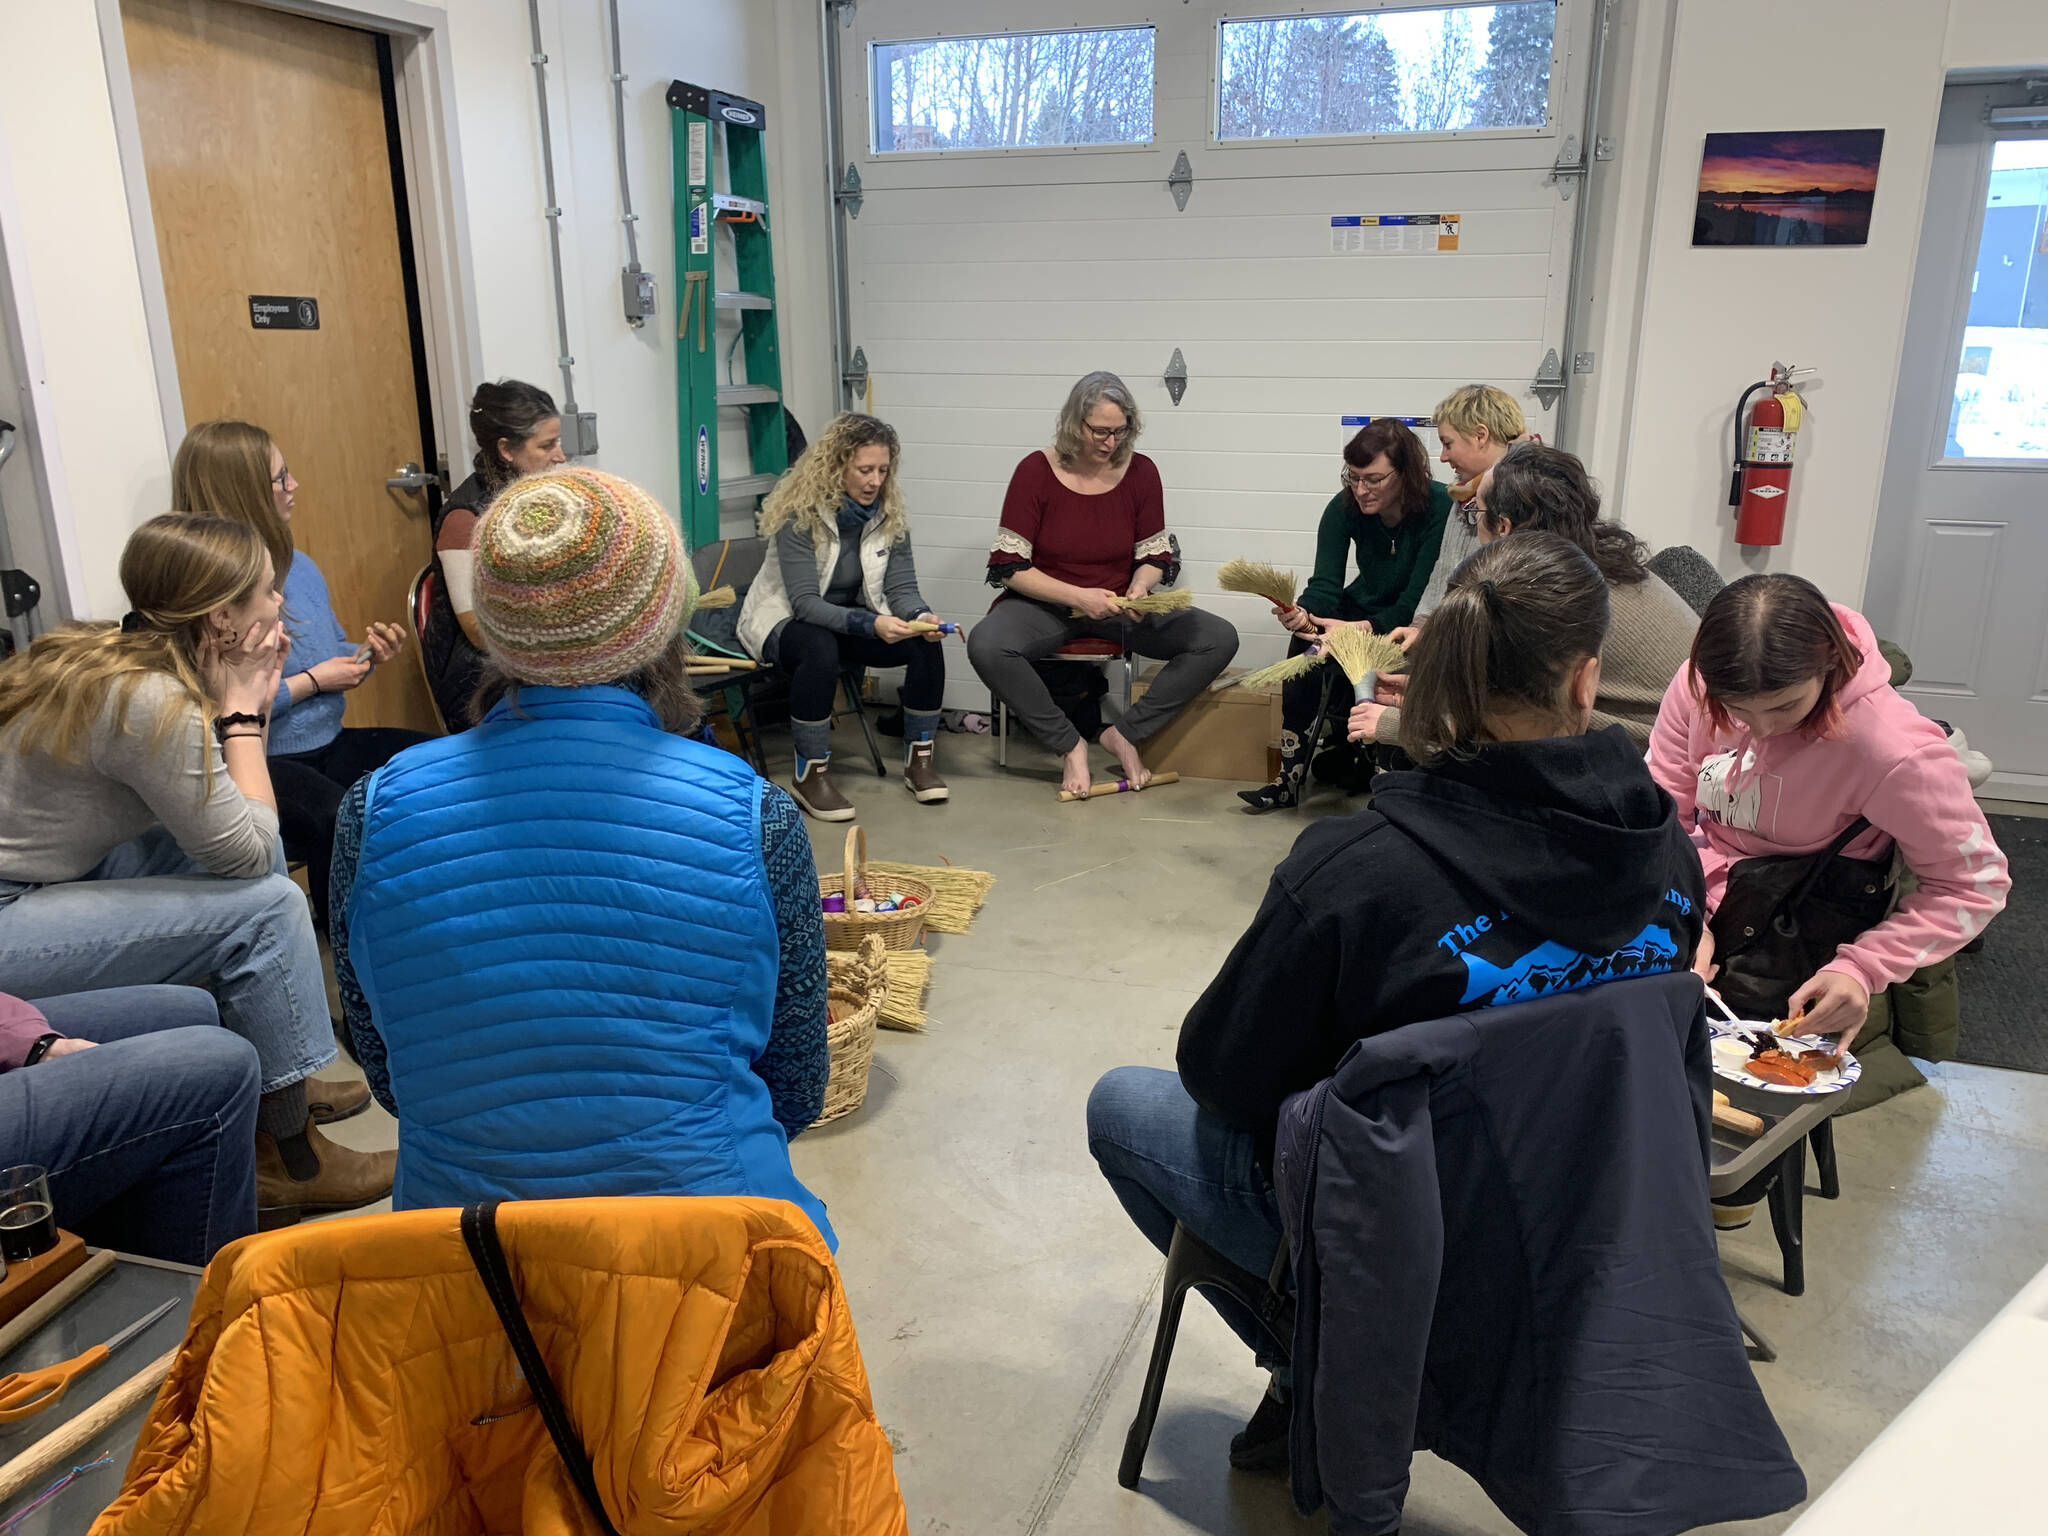 A broom-making workshop at Grace Ridge Brewing with Willow Q Jones, (center), Jan. 22, 2023, in Homer, Alaska. (Photo by Christina Whiting)